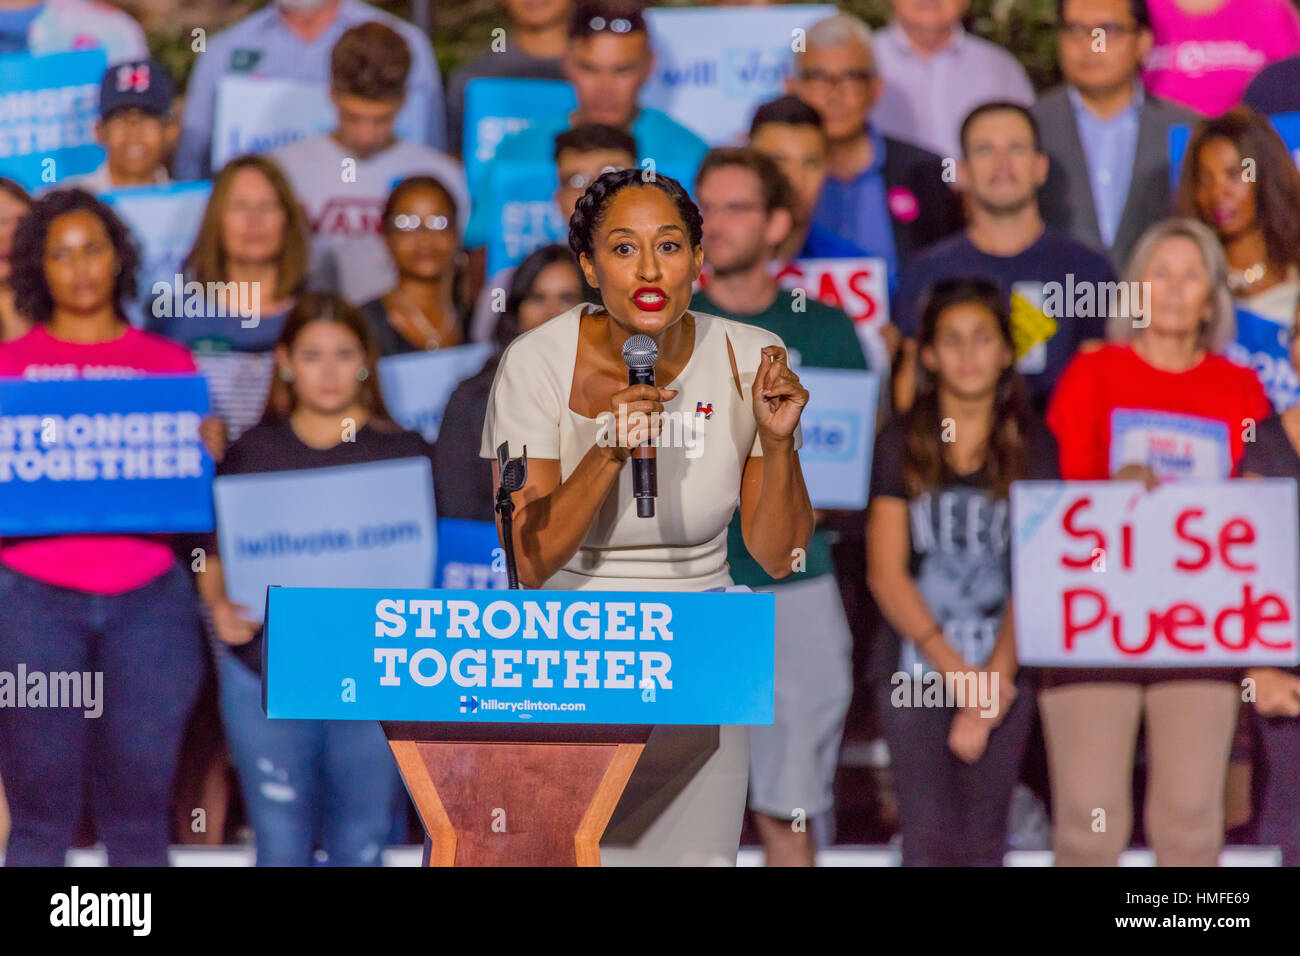 OCTOBER 12, 2016, US Tracie Ellis Ross, TV star, introduces introduces Democratic Candidate Hillary Clinton campaign at the Smith Center for the Arts, Las Vegas, Nevada Stock Photo